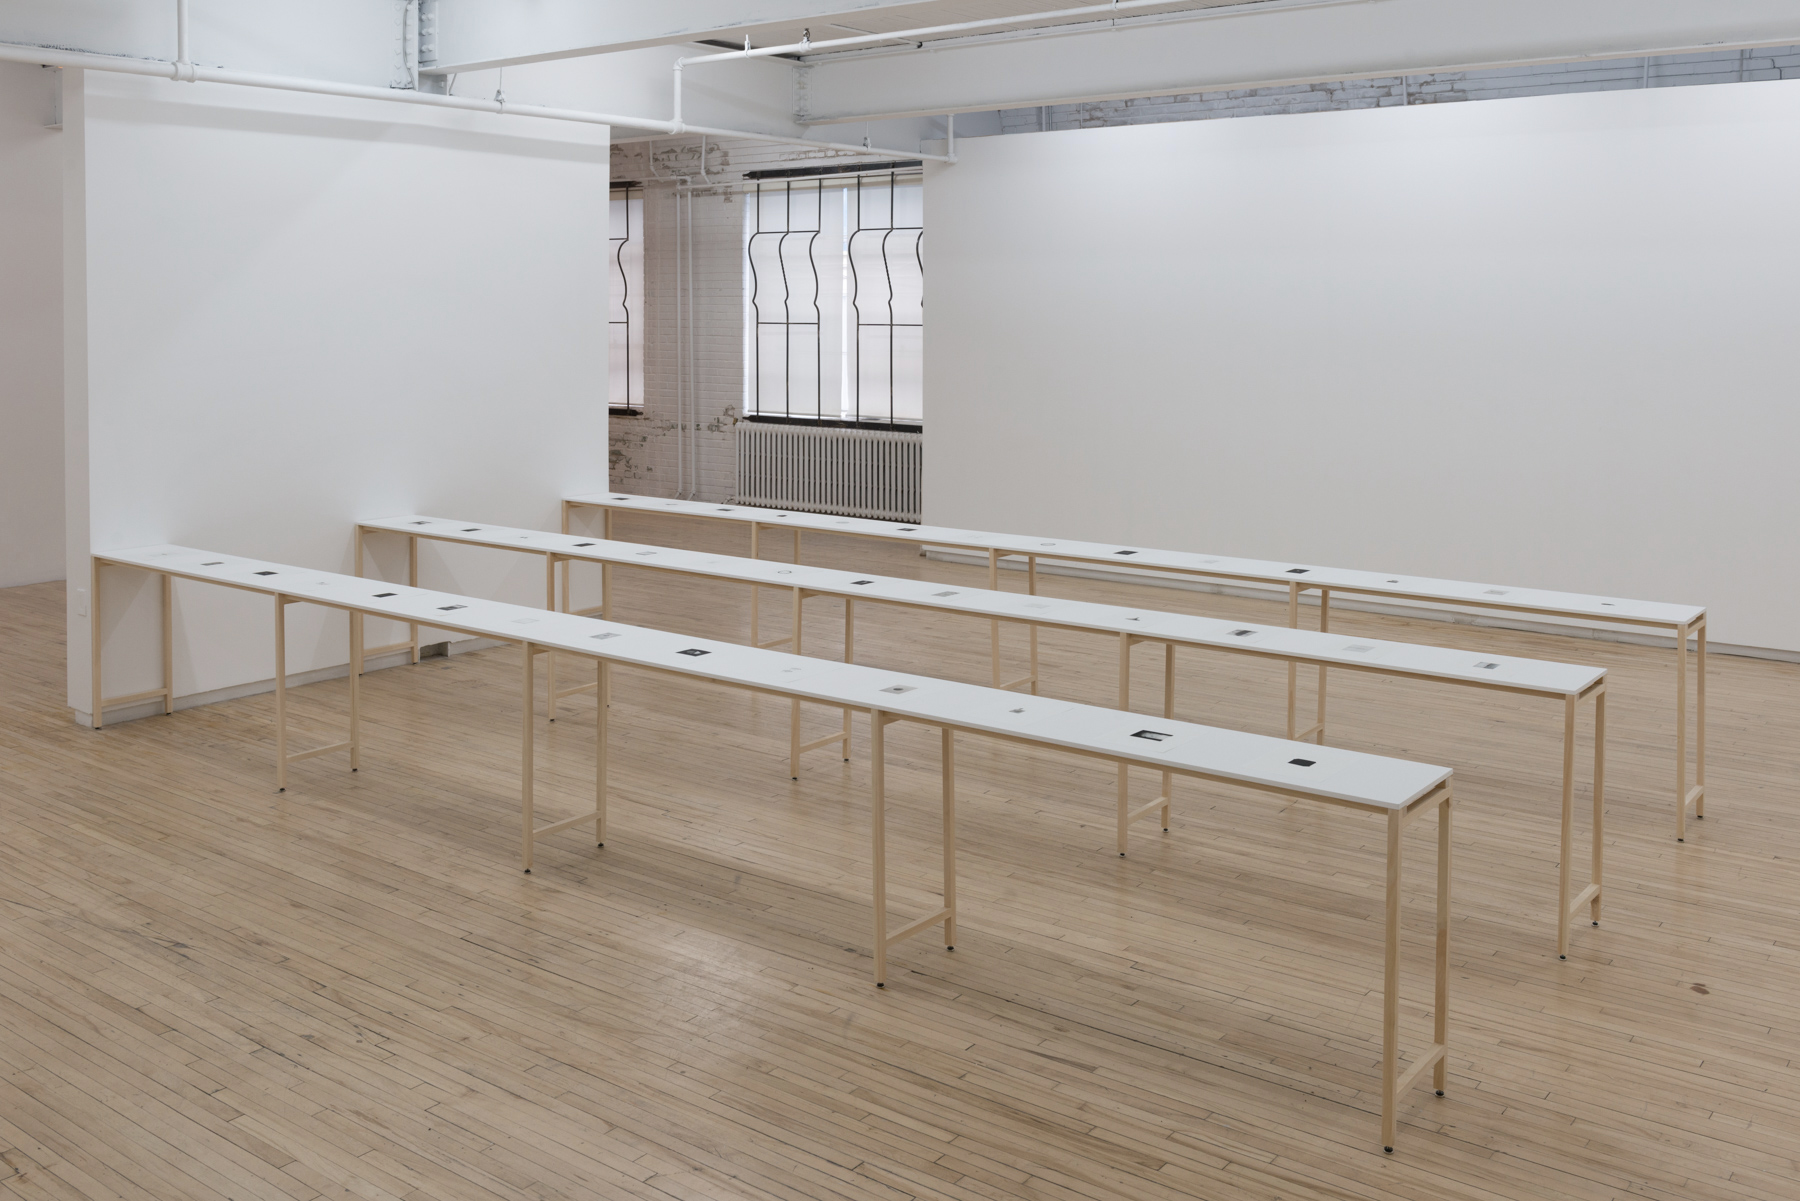 sophie-jodoin_installation-view-une-certaine-instabilite-emotionnelle_april-15-may-30_battat-contemporary-montreal-photo-paul-litherland_courtesy-battat-contemporary-01